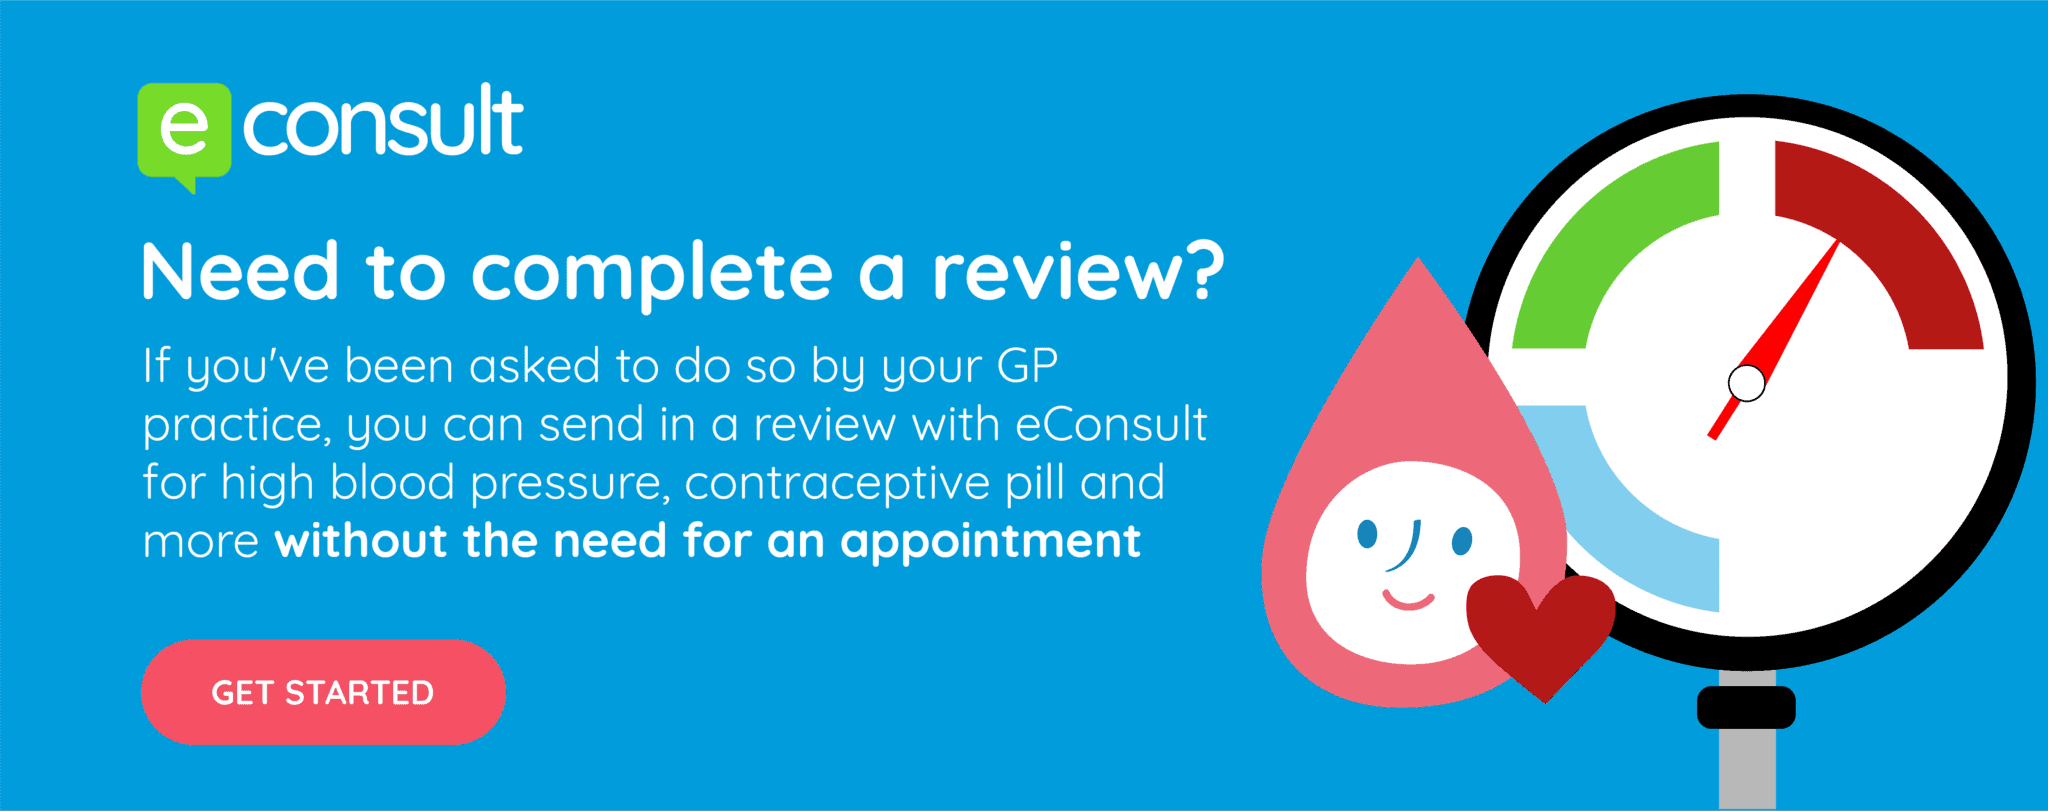 Need to complete a review? Get started.